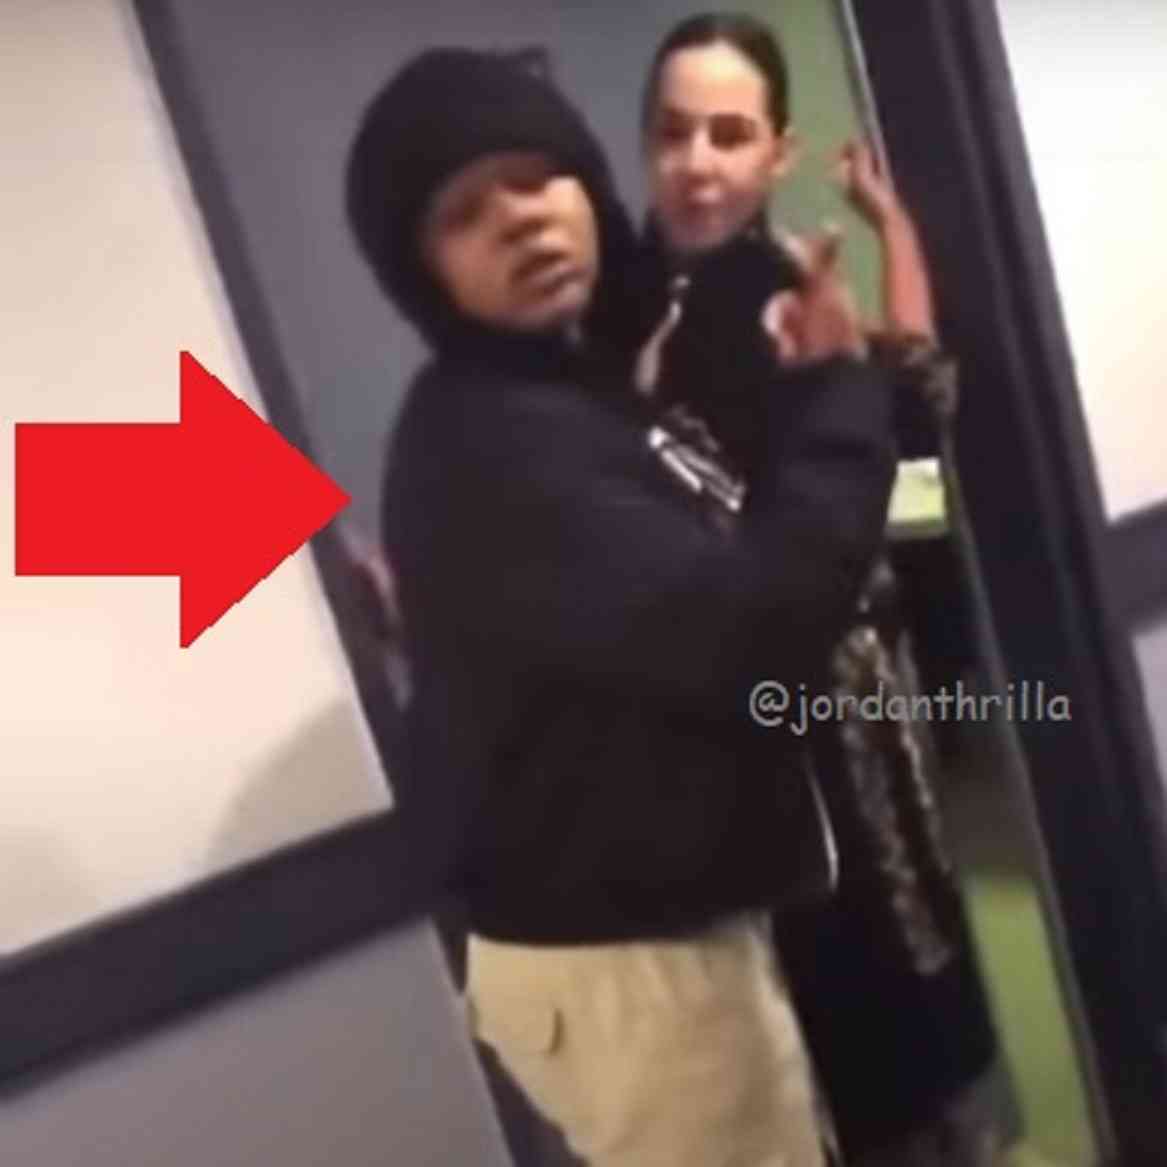 Girl Who Slapped Mother Of Another Girl in Viral Video Gets Shot 15 Times and Killed